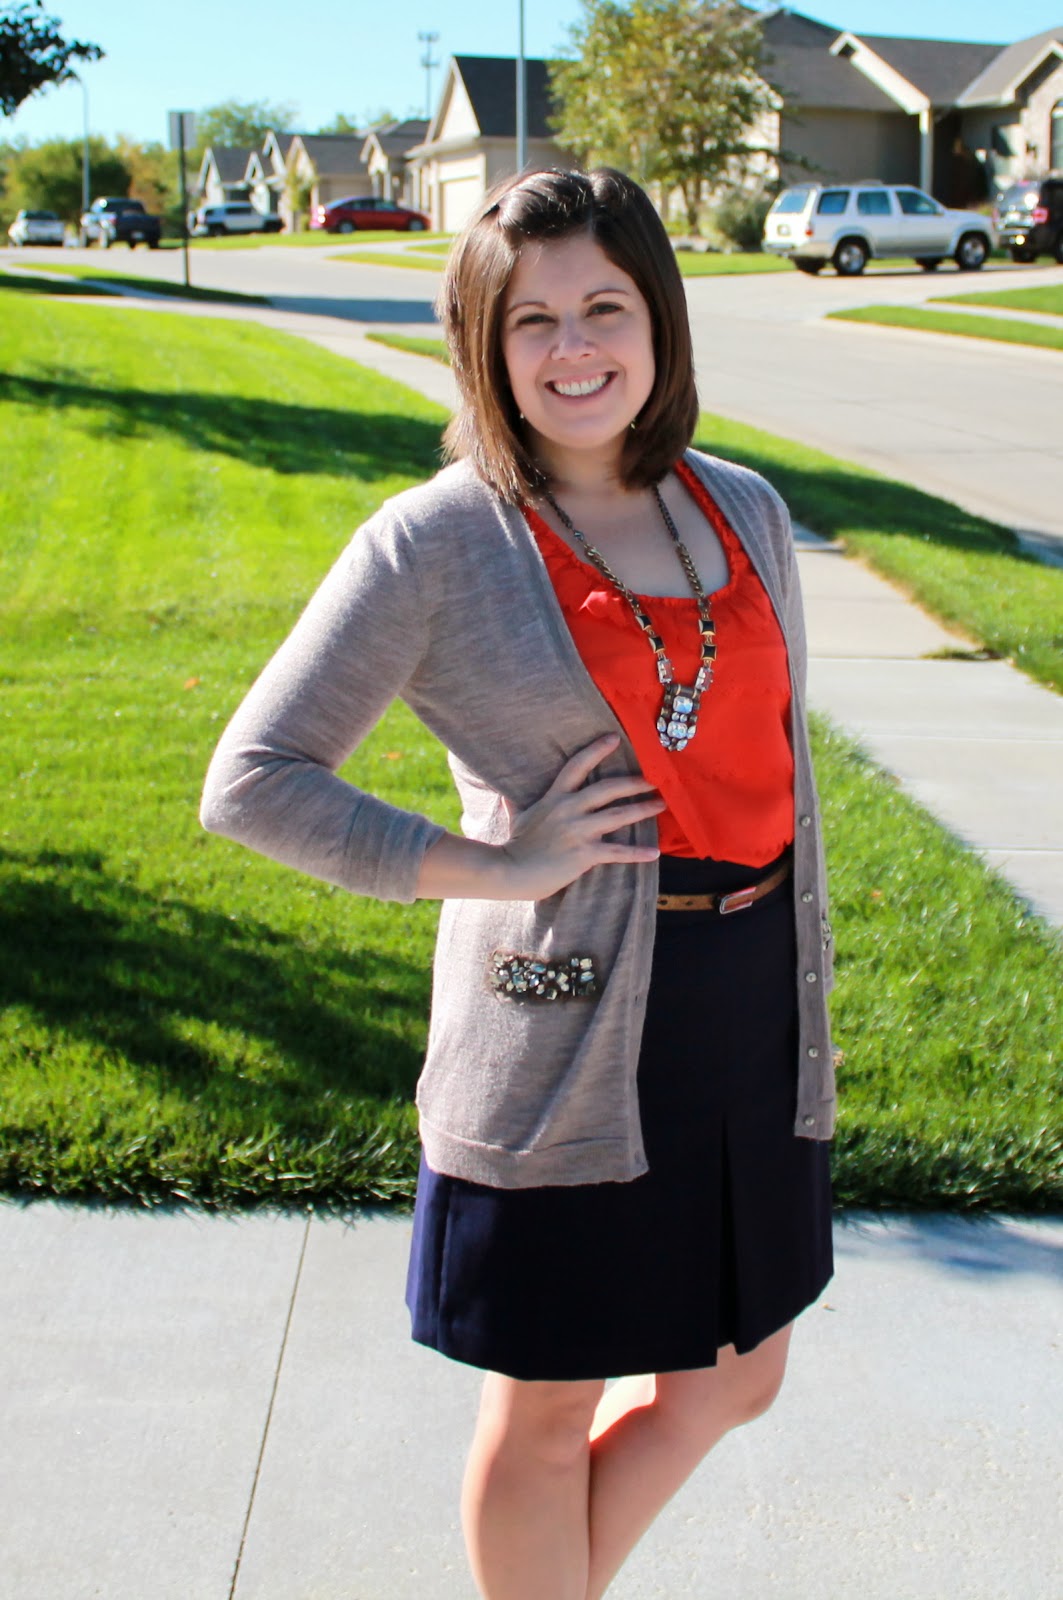 My New Favorite Outfit: What to Wear With Orange